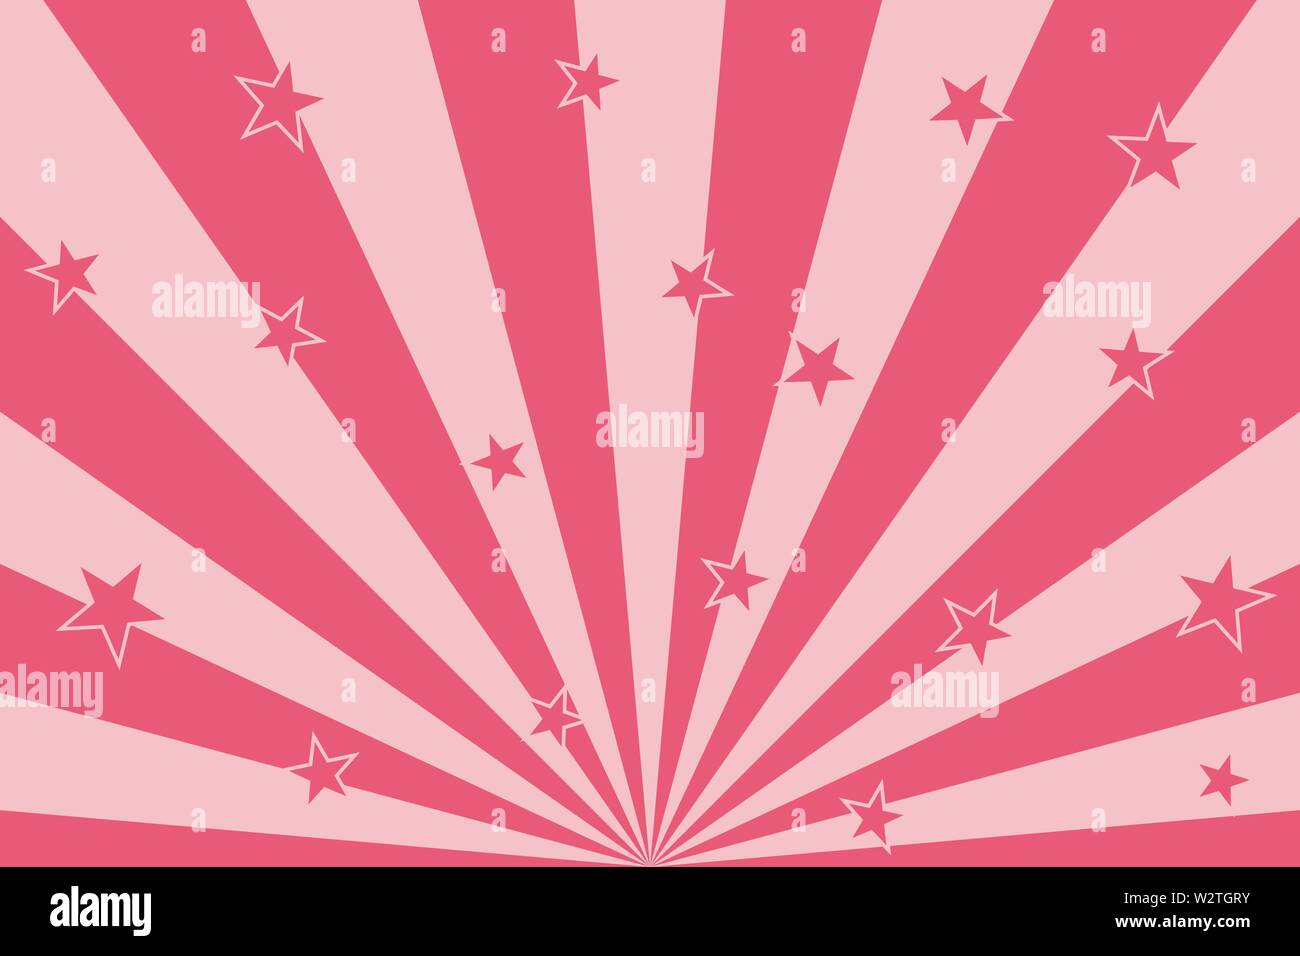 Pink stars with rays abstract vector illustration radial lines background Stock Vector